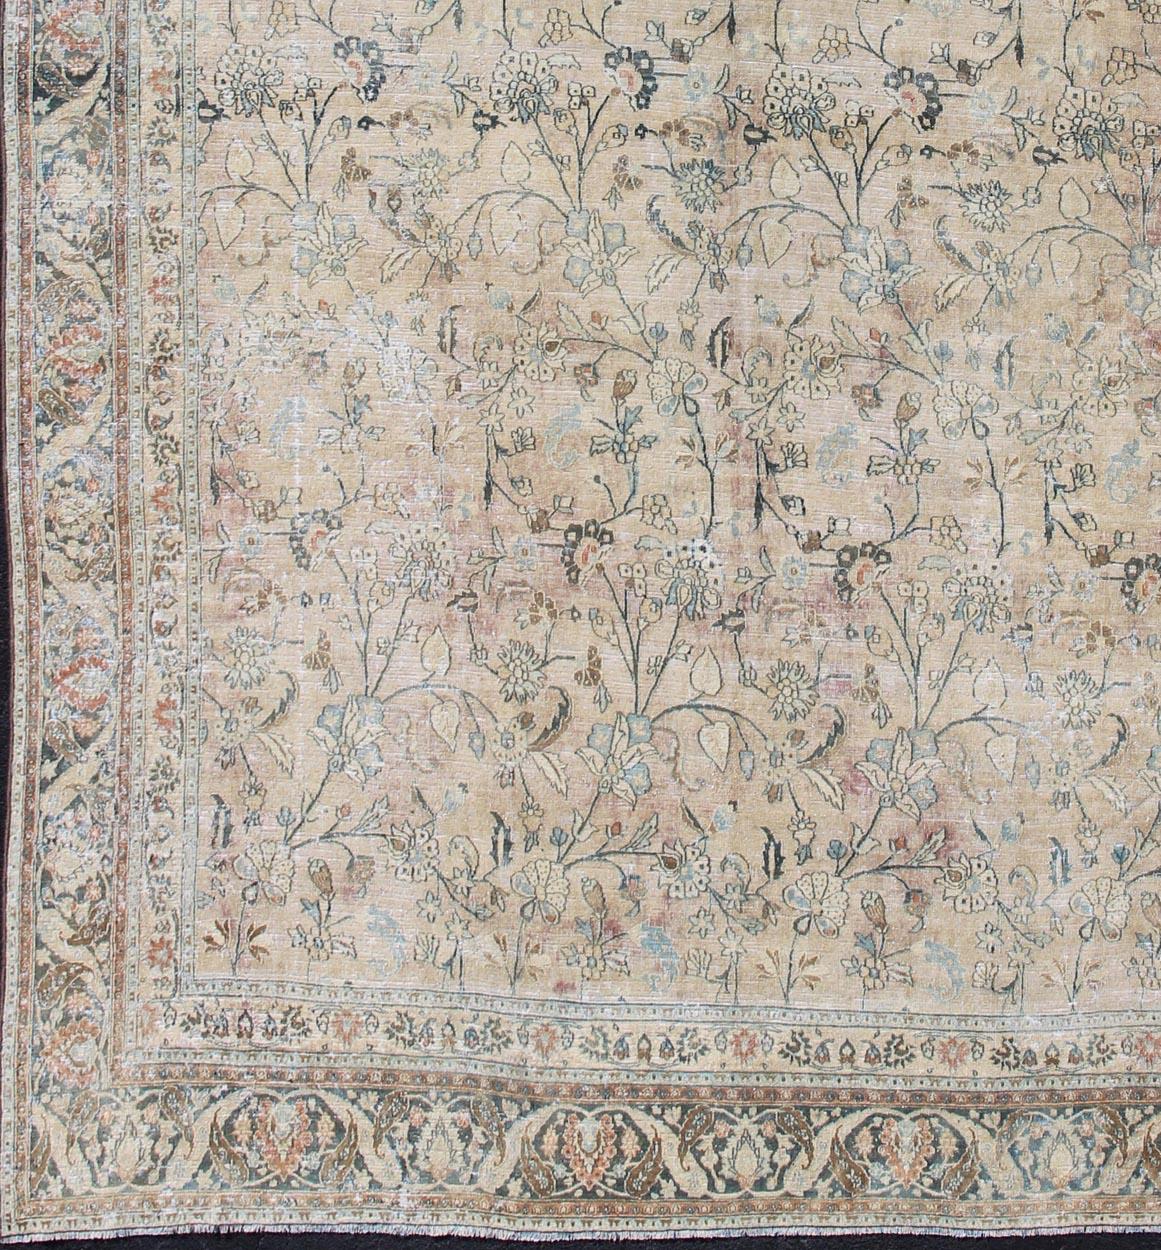 Earth tones large Antique Persian Khorassan with All-Over Earth Tones in neutral tones and Neutral background with Brown, Blue. Sub floral design Khorassan antique rug from Persia in natural color Palette. Keivan Woven Arts / rug 19-0605, country of